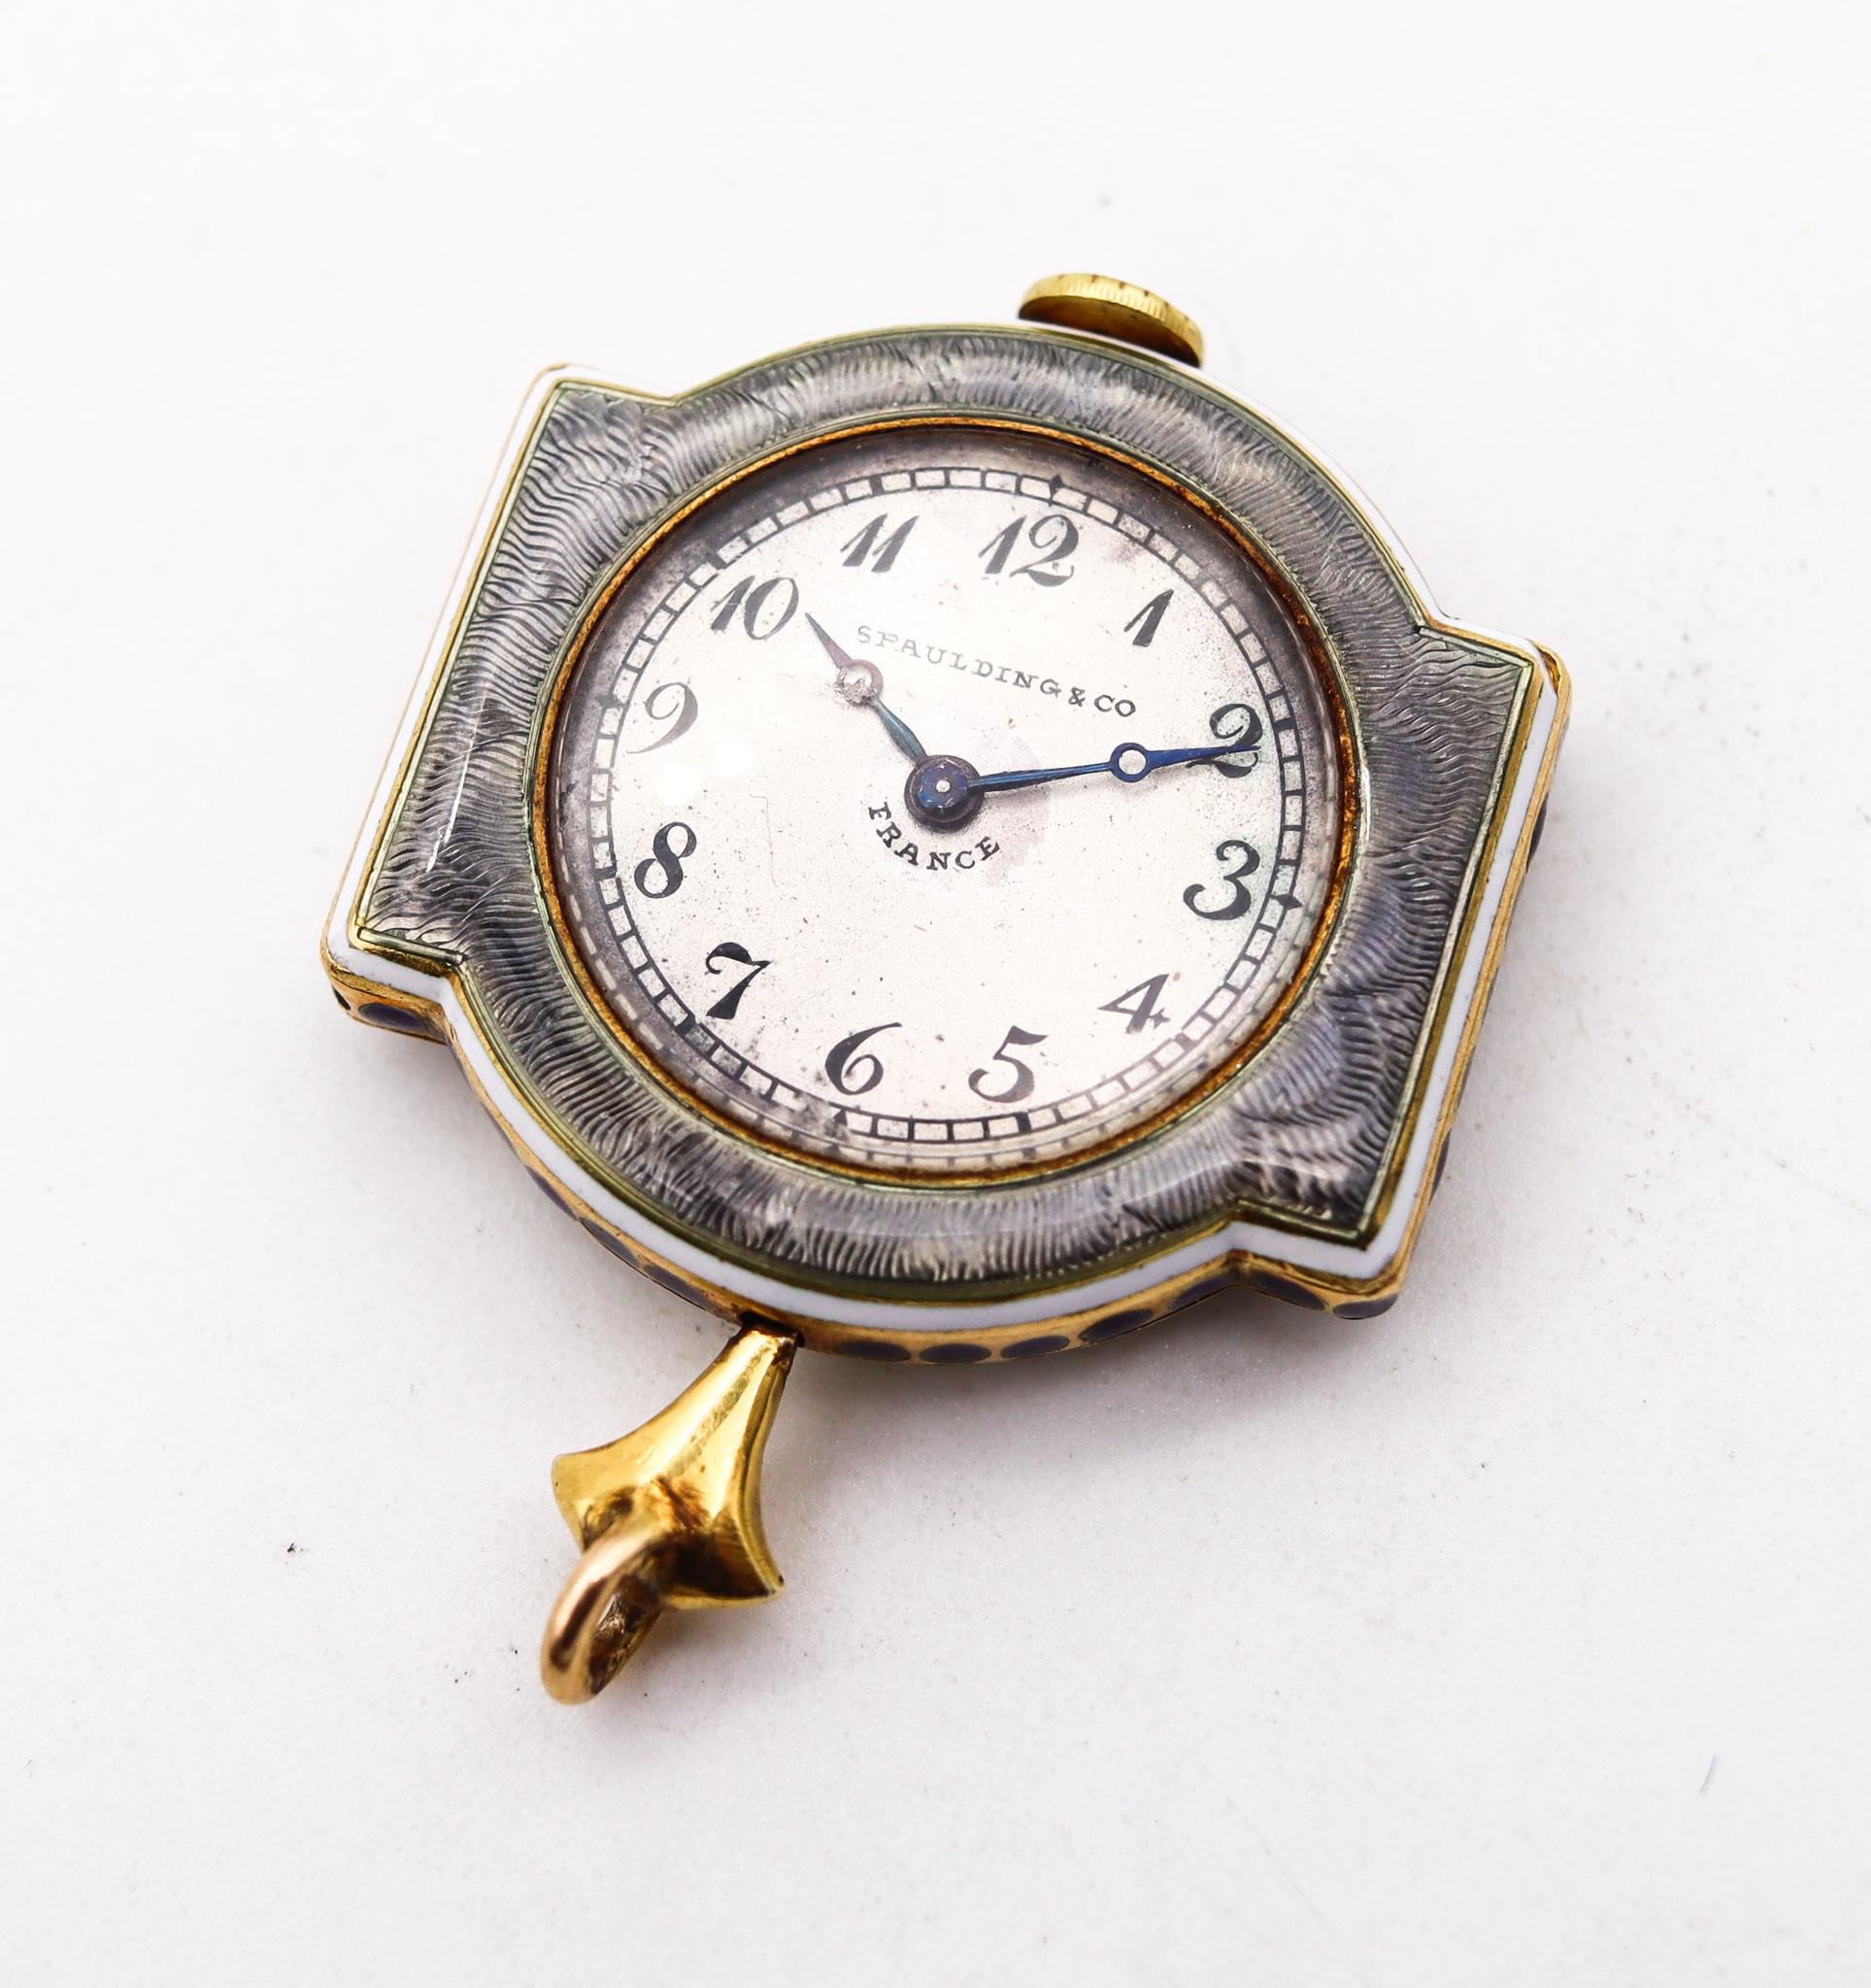 An Edwardian Neo-classic Watch designed by Verger Freres for Spaulding & Co.

A fabulous and magnificent watch pendant, created by Ferdinand Verger Freres in platinum, 18 karats yellow gold, diamonds, & guilloche enamel. This is a one of a kind and